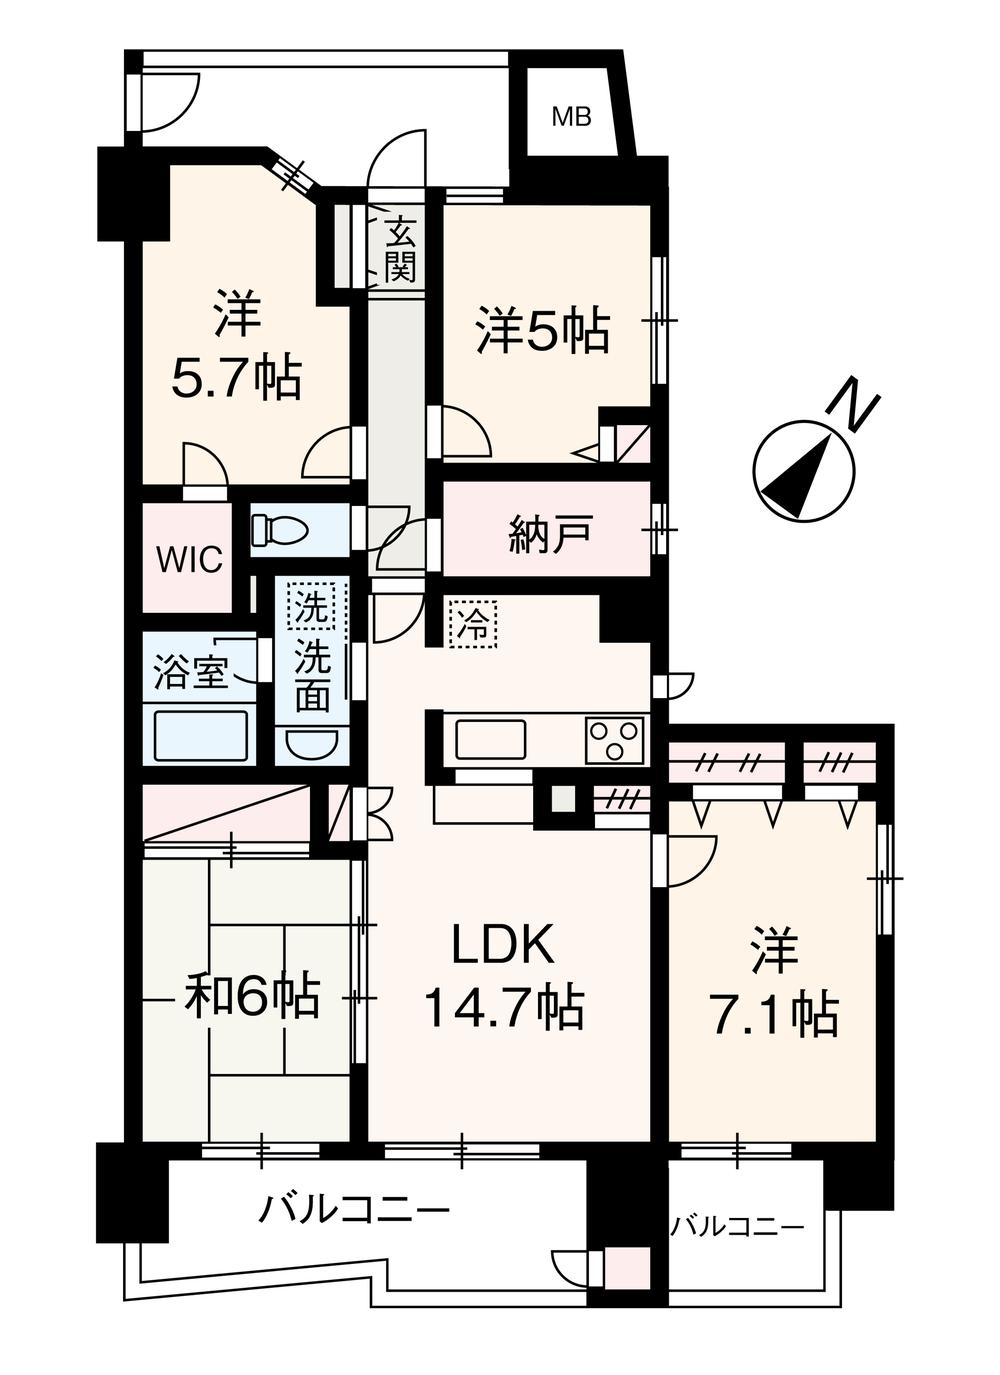 Floor plan. 4LDK + S (storeroom), Price 48,800,000 yen, Occupied area 86.51 sq m , There is a floor plan of the width on the balcony area 13.11 sq m southeast plane.